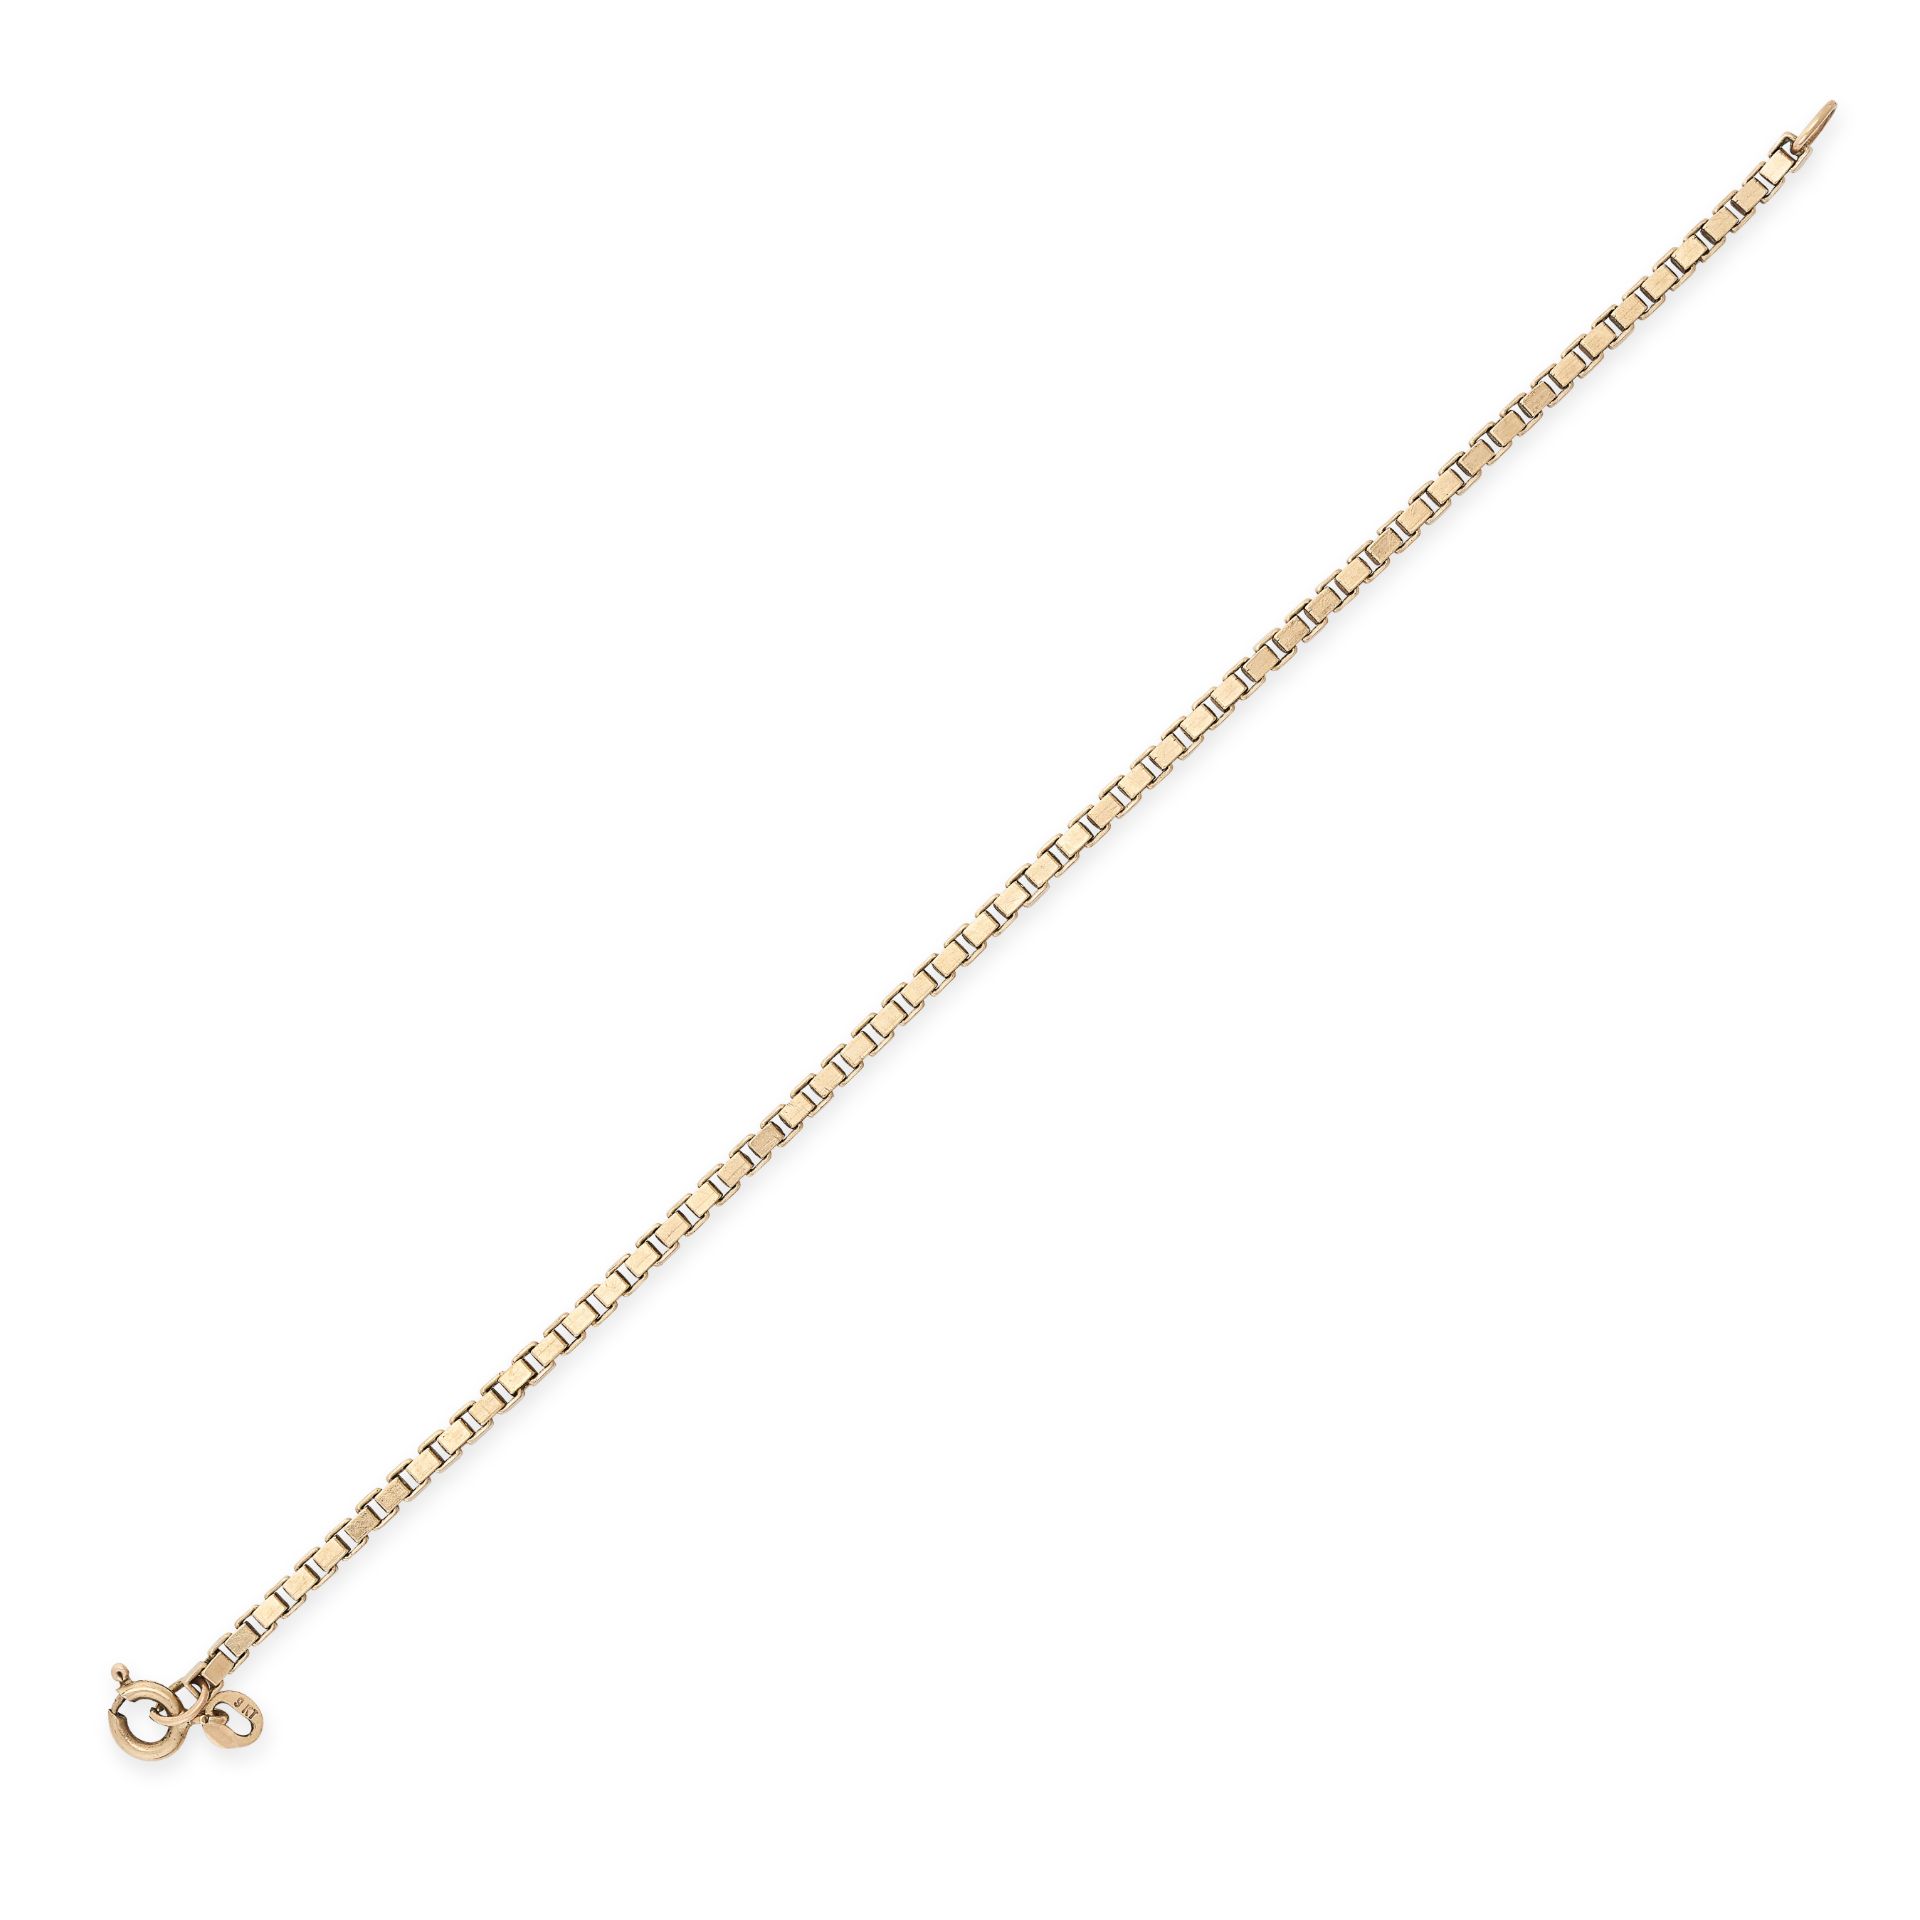 A VINTAGE GOLD BRACELET in 9ct yellow gold, comprising a box link chain, stamped 9KT, 17.0cm, 6.3g.